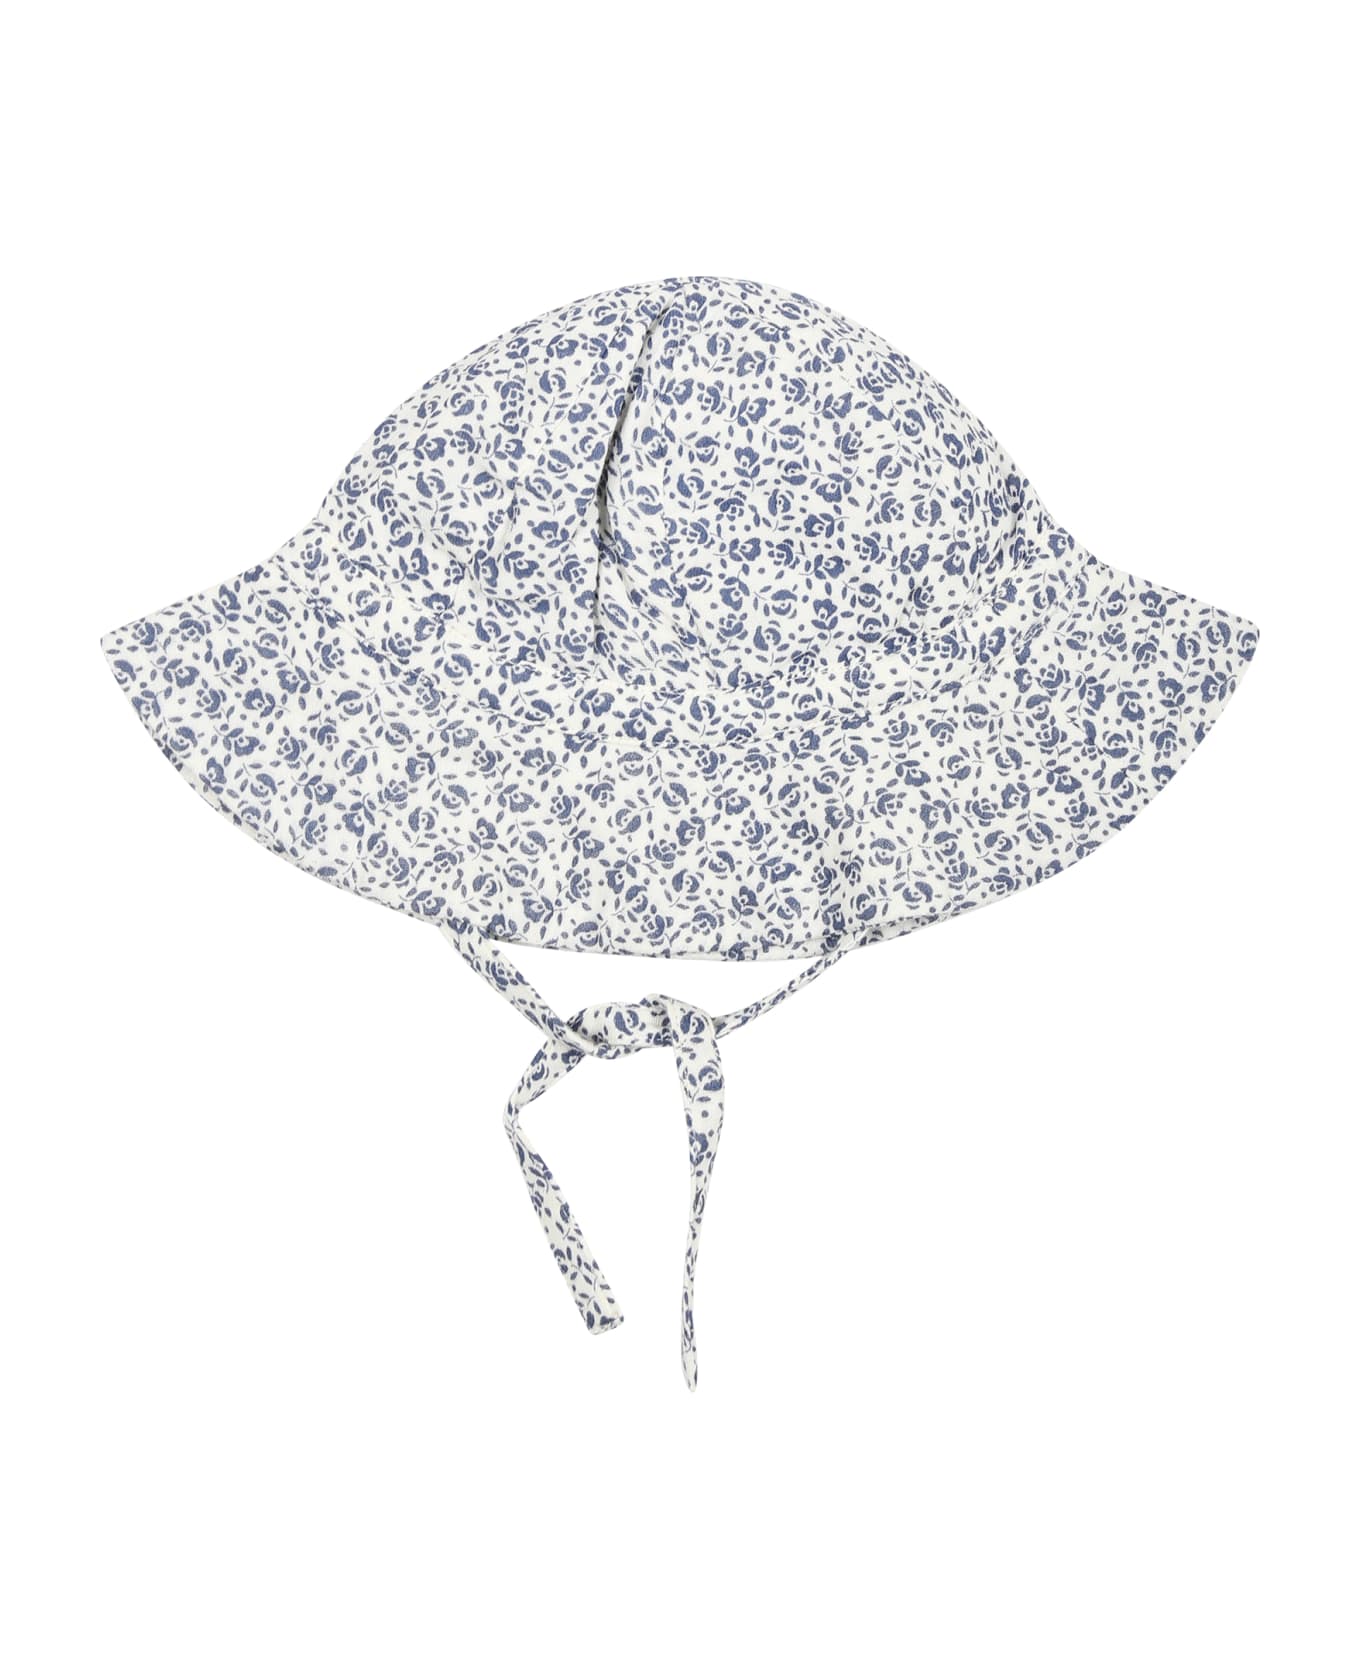 Petit Bateau White Cloche For Baby Girl With Flowers - White